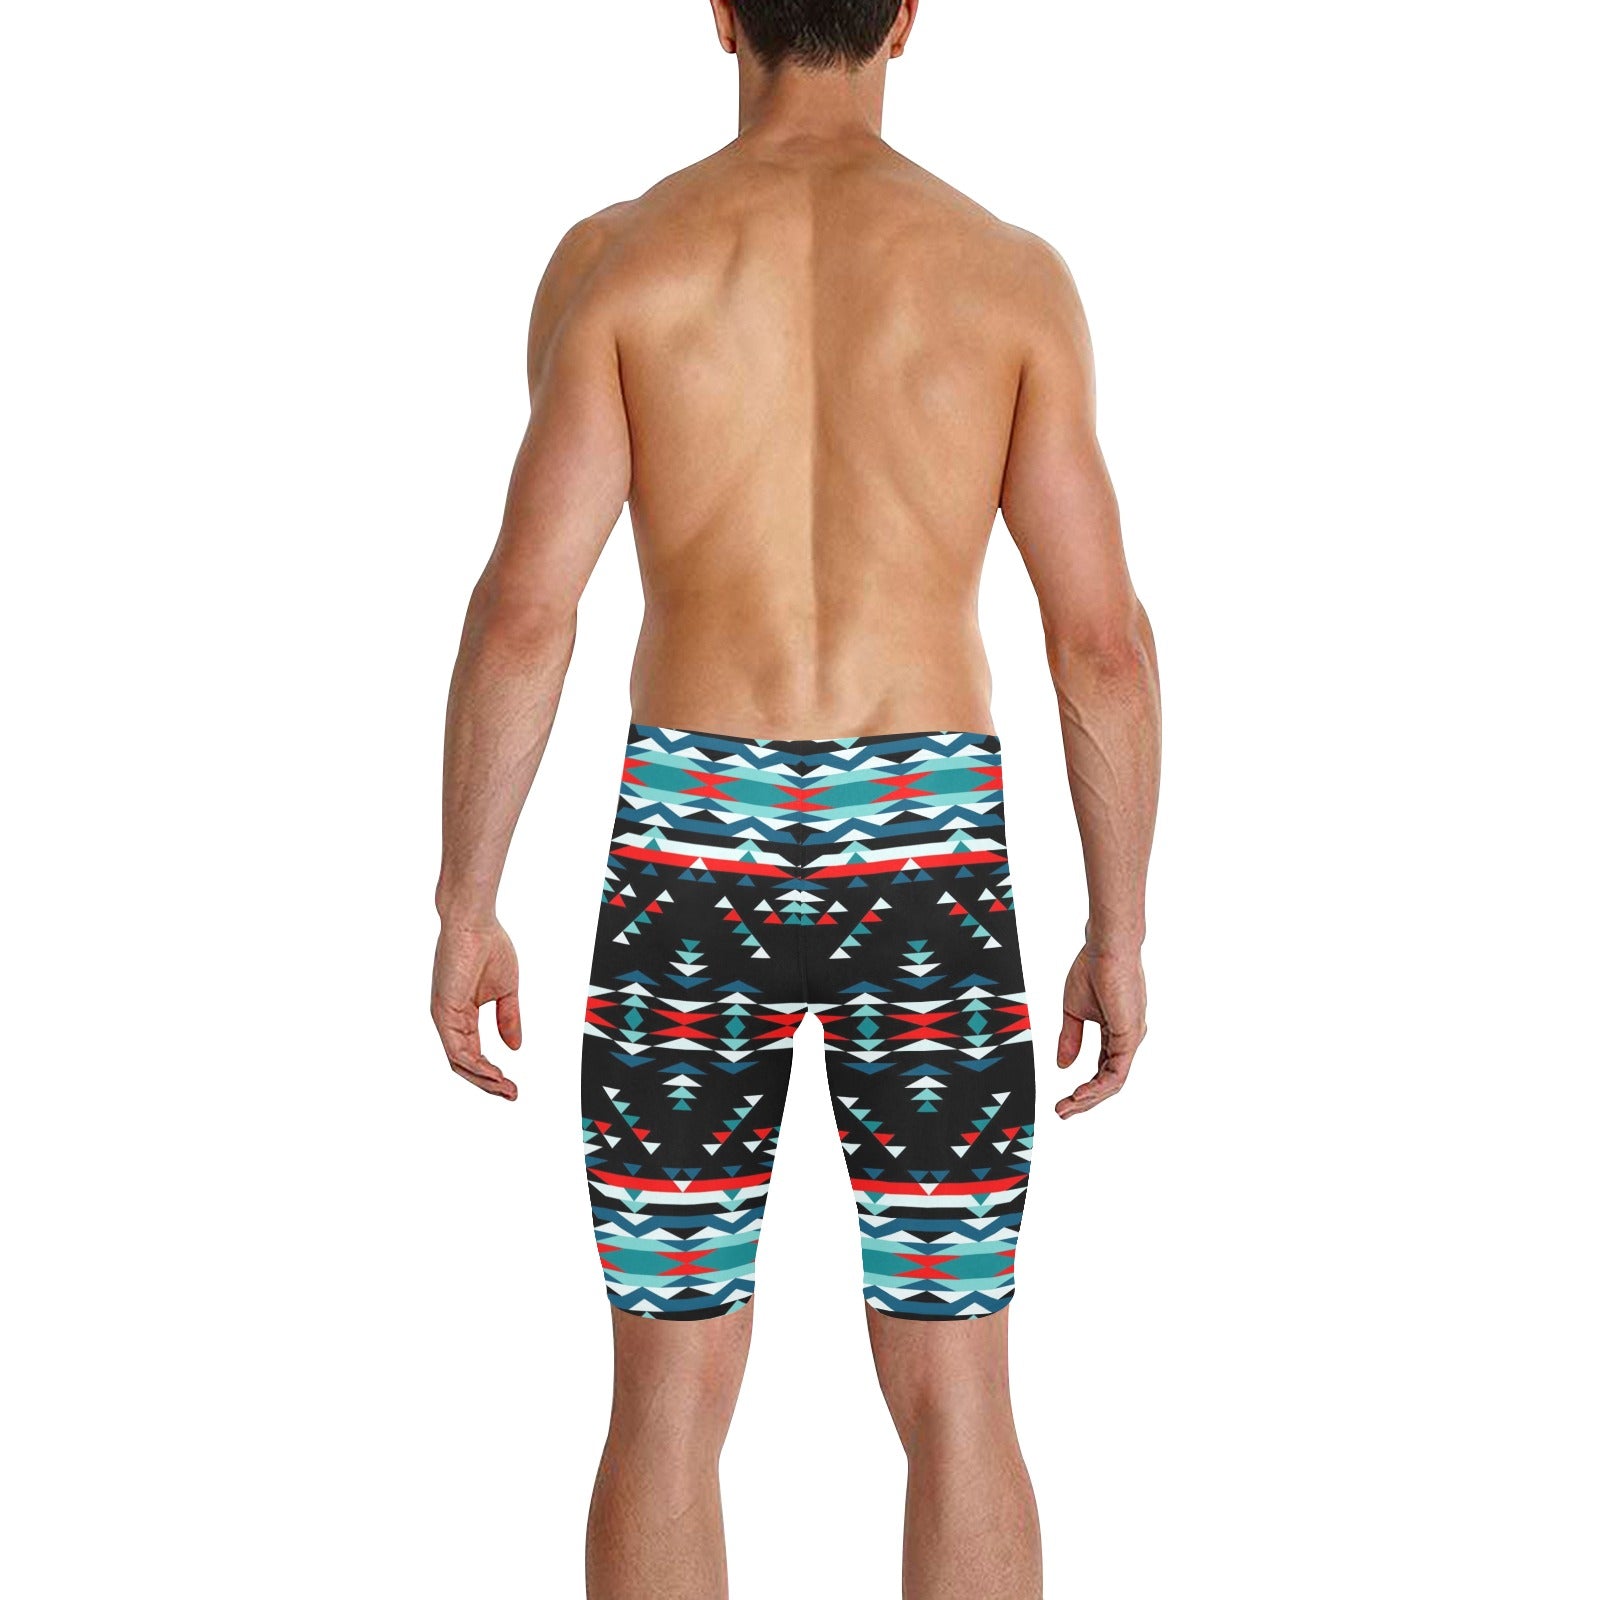 Visions of Peaceful Nights Men's Knee Length Swimming Trunks